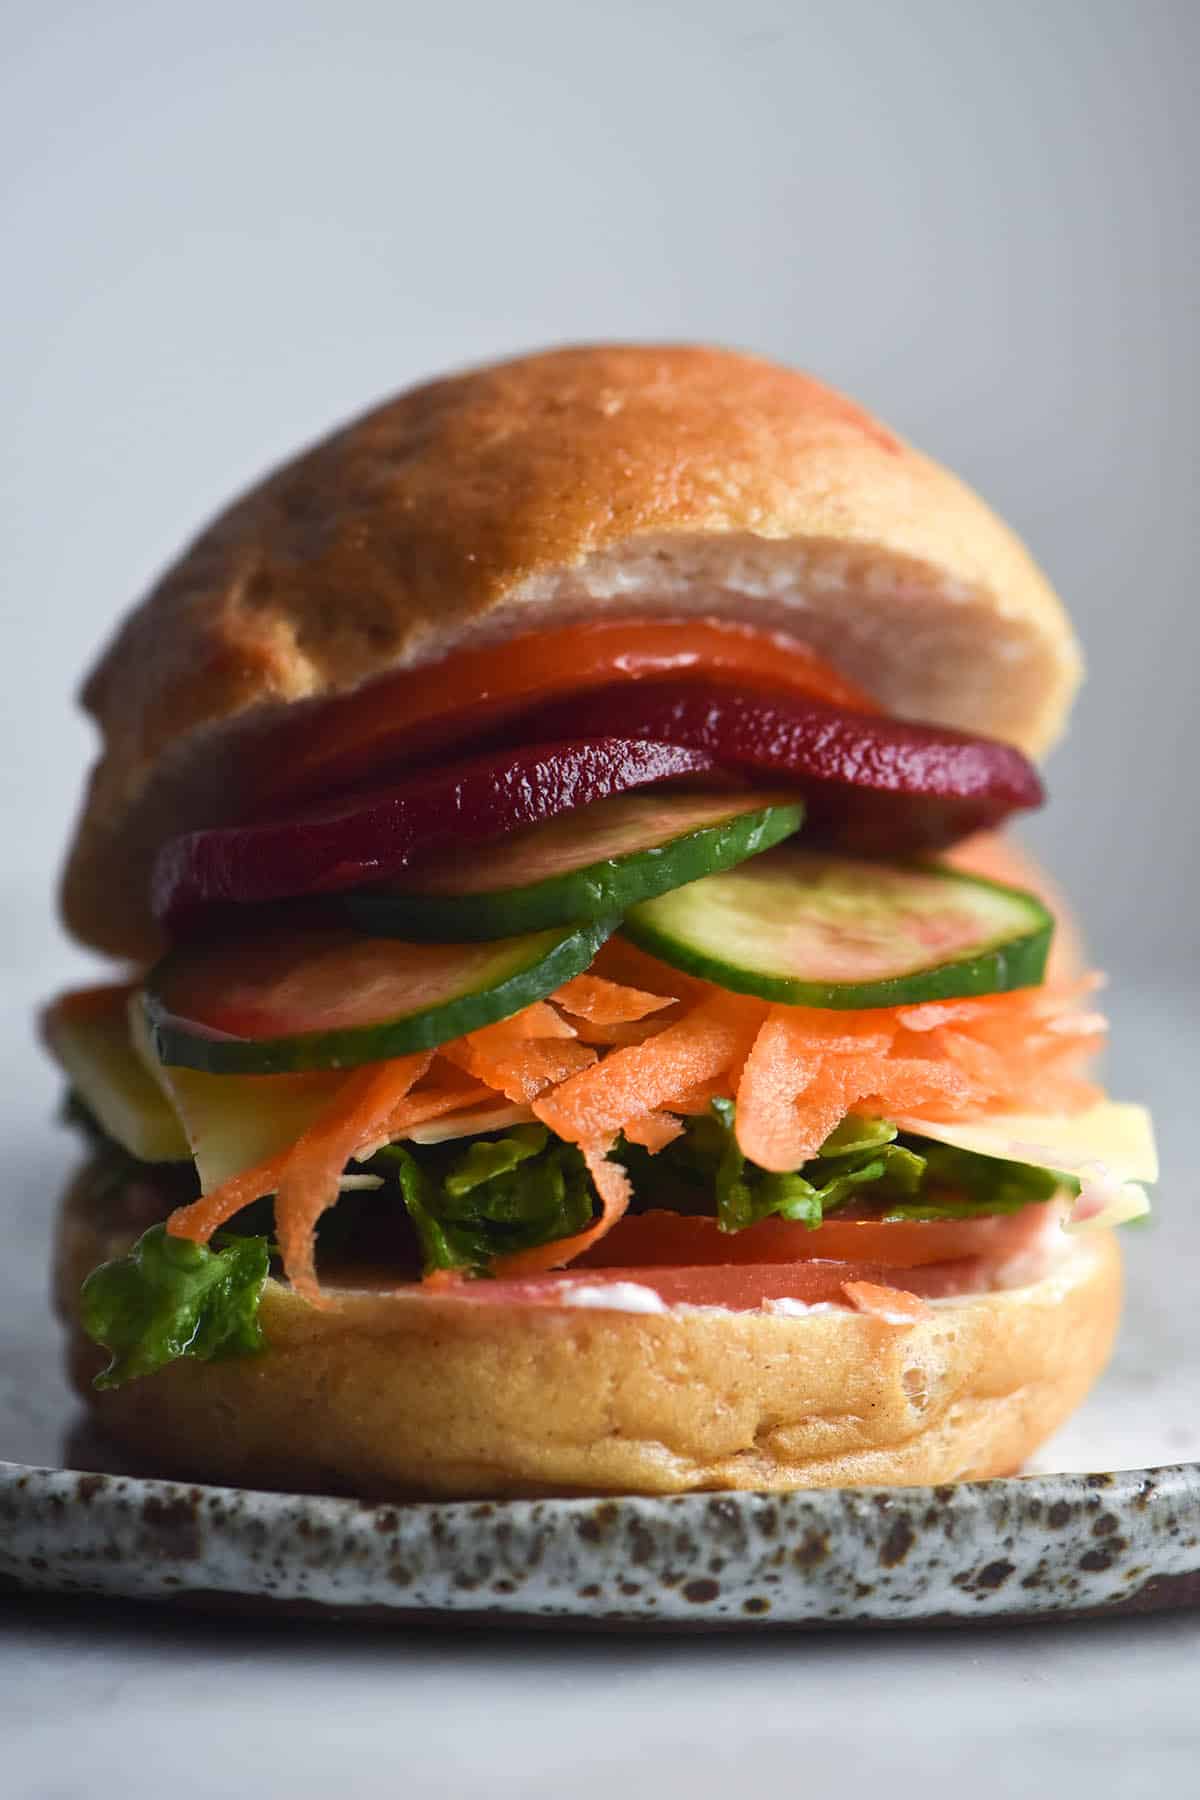 A side on close up view of a gluten free bread roll made into a salad sandwich. The salad sits atop the bun base and the top sits loftily atop the salad. It sits on a white ceramic plate against a white backdrop.